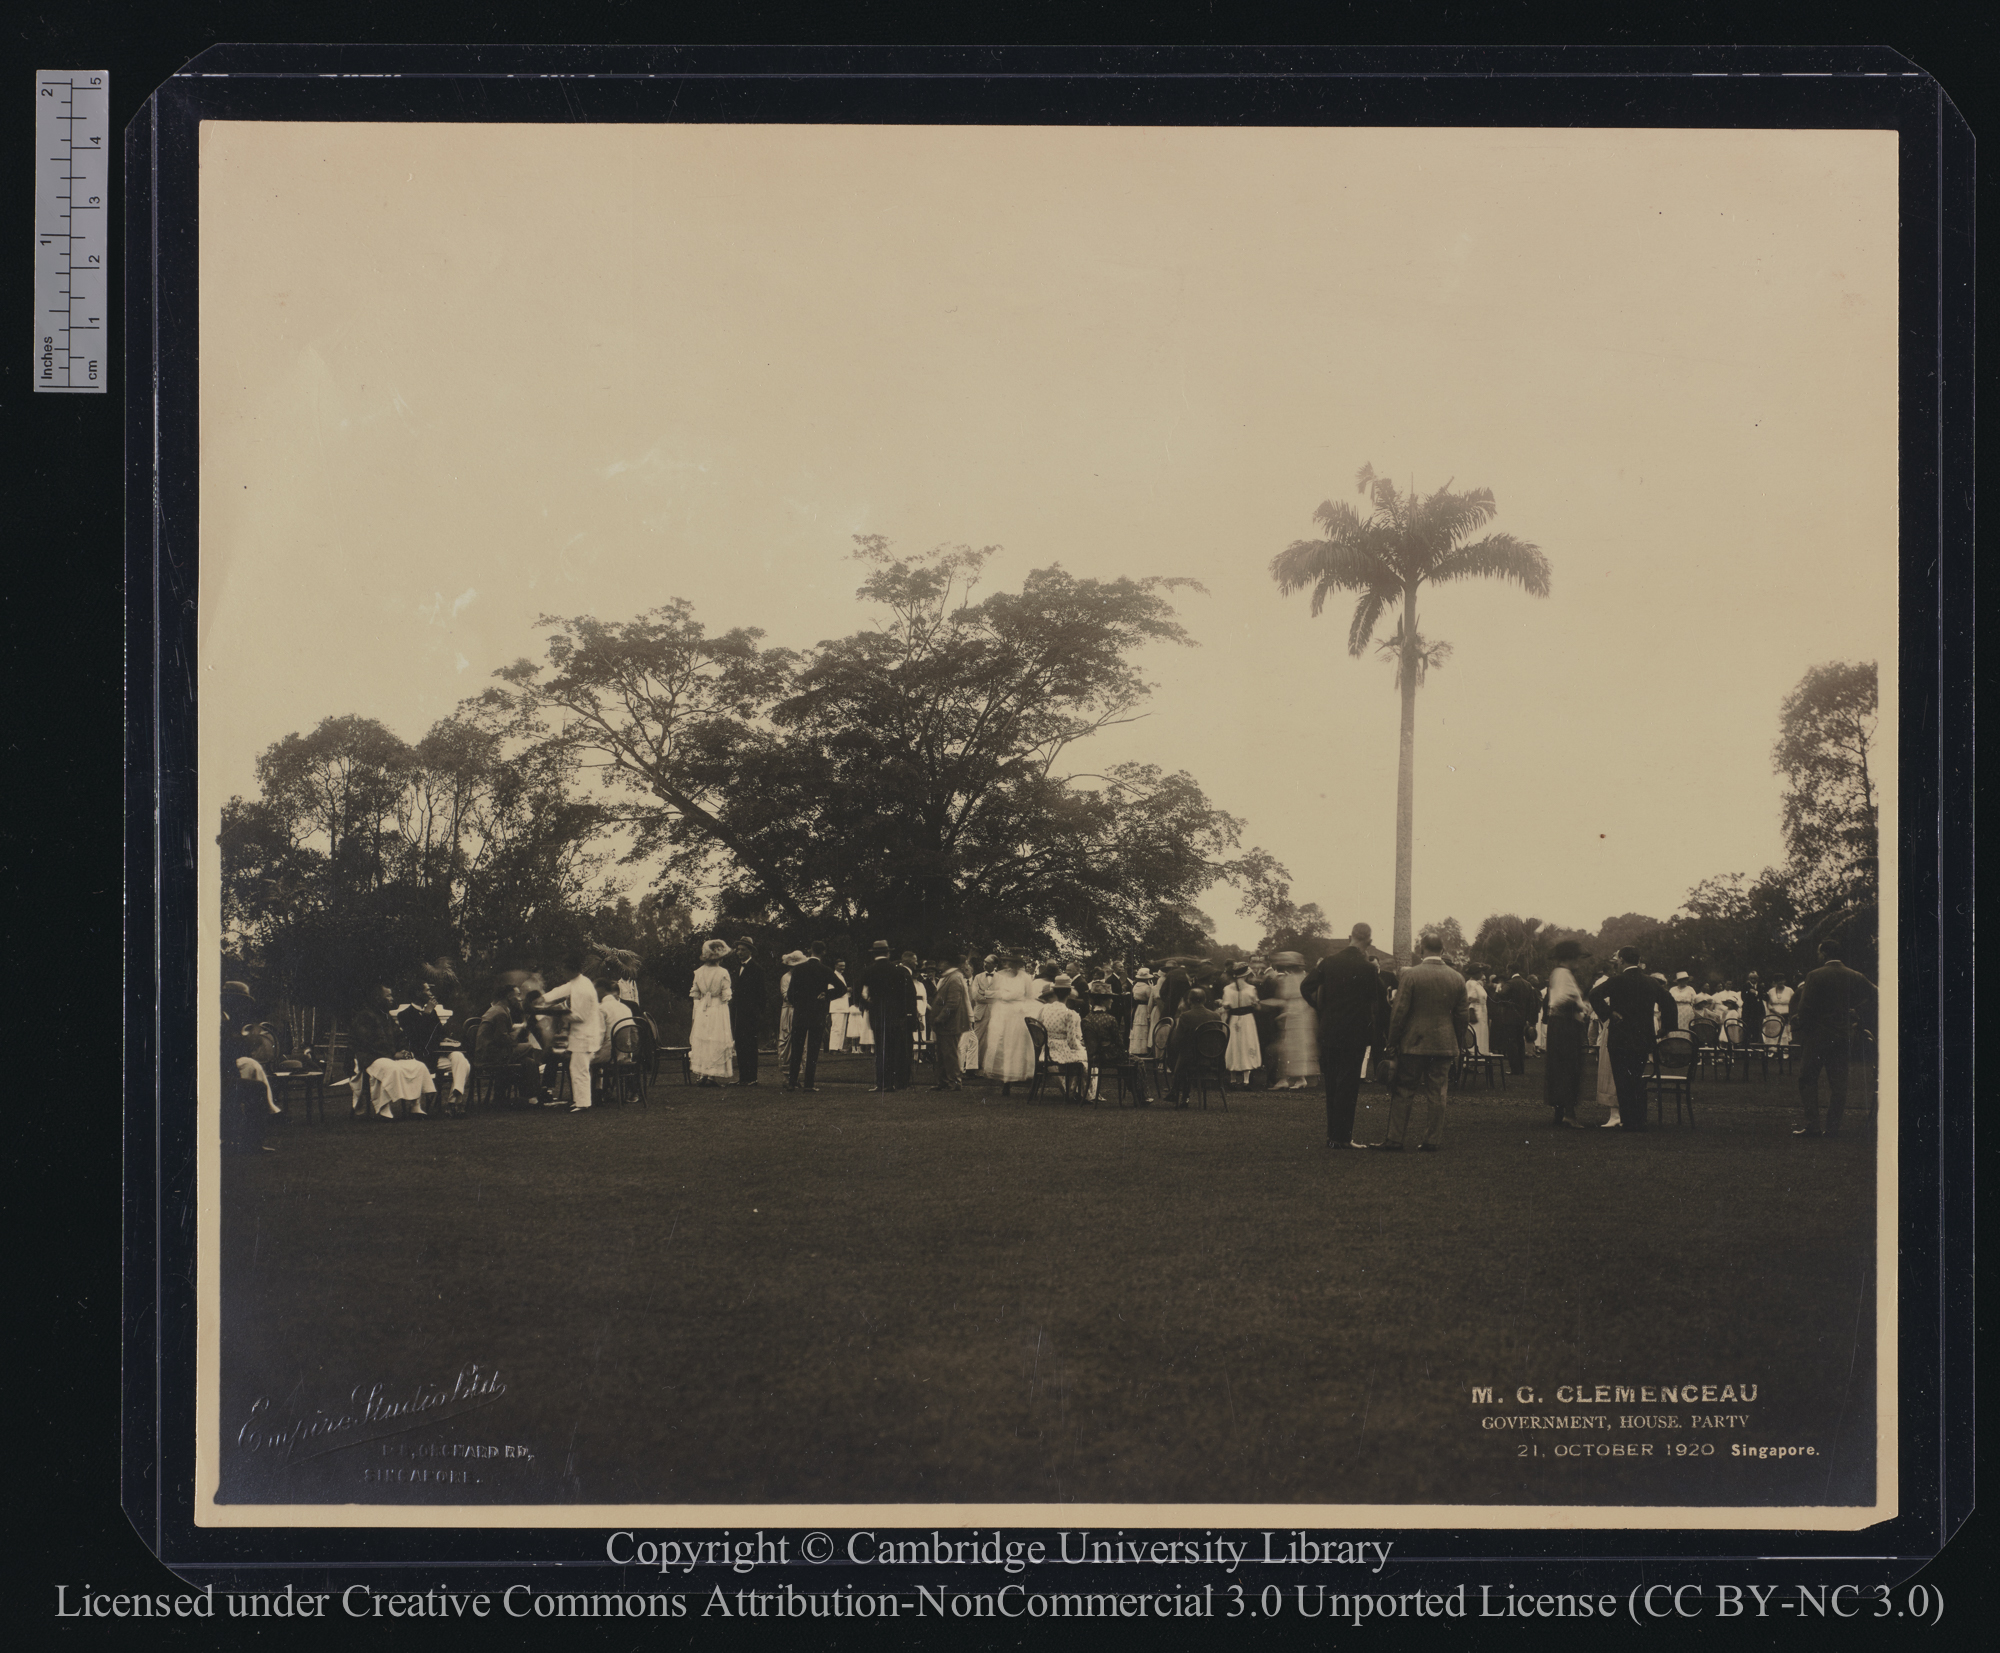 M.G. Clemenceau, Government House Part, Singapore, 21 October 1920, 1920-10-21